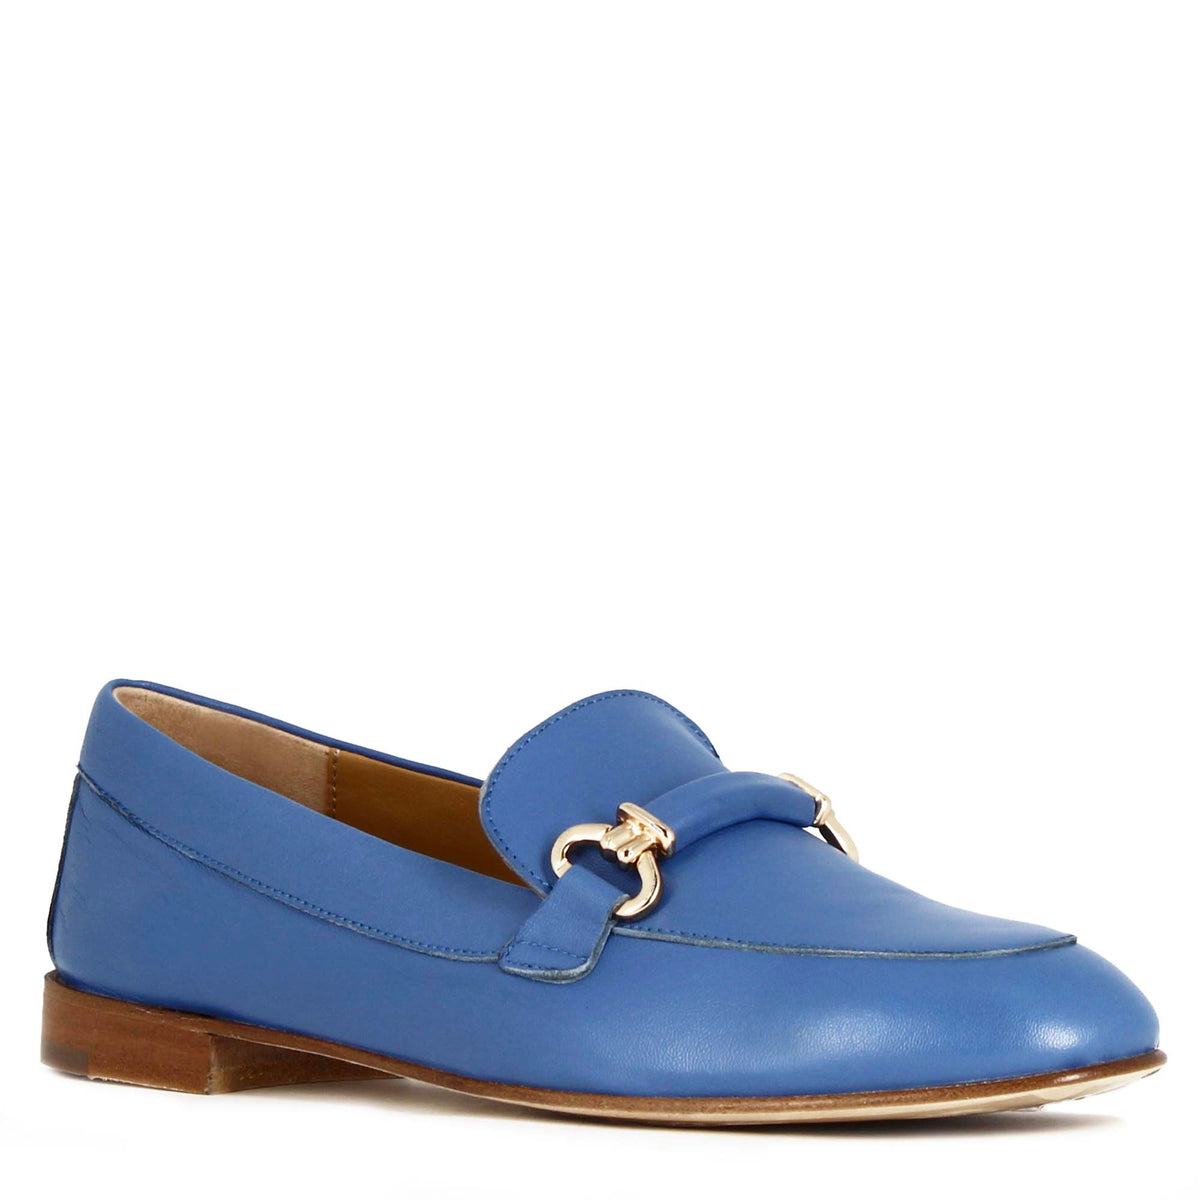 Women's moccasin with clamp and buckle in handmade blue leather